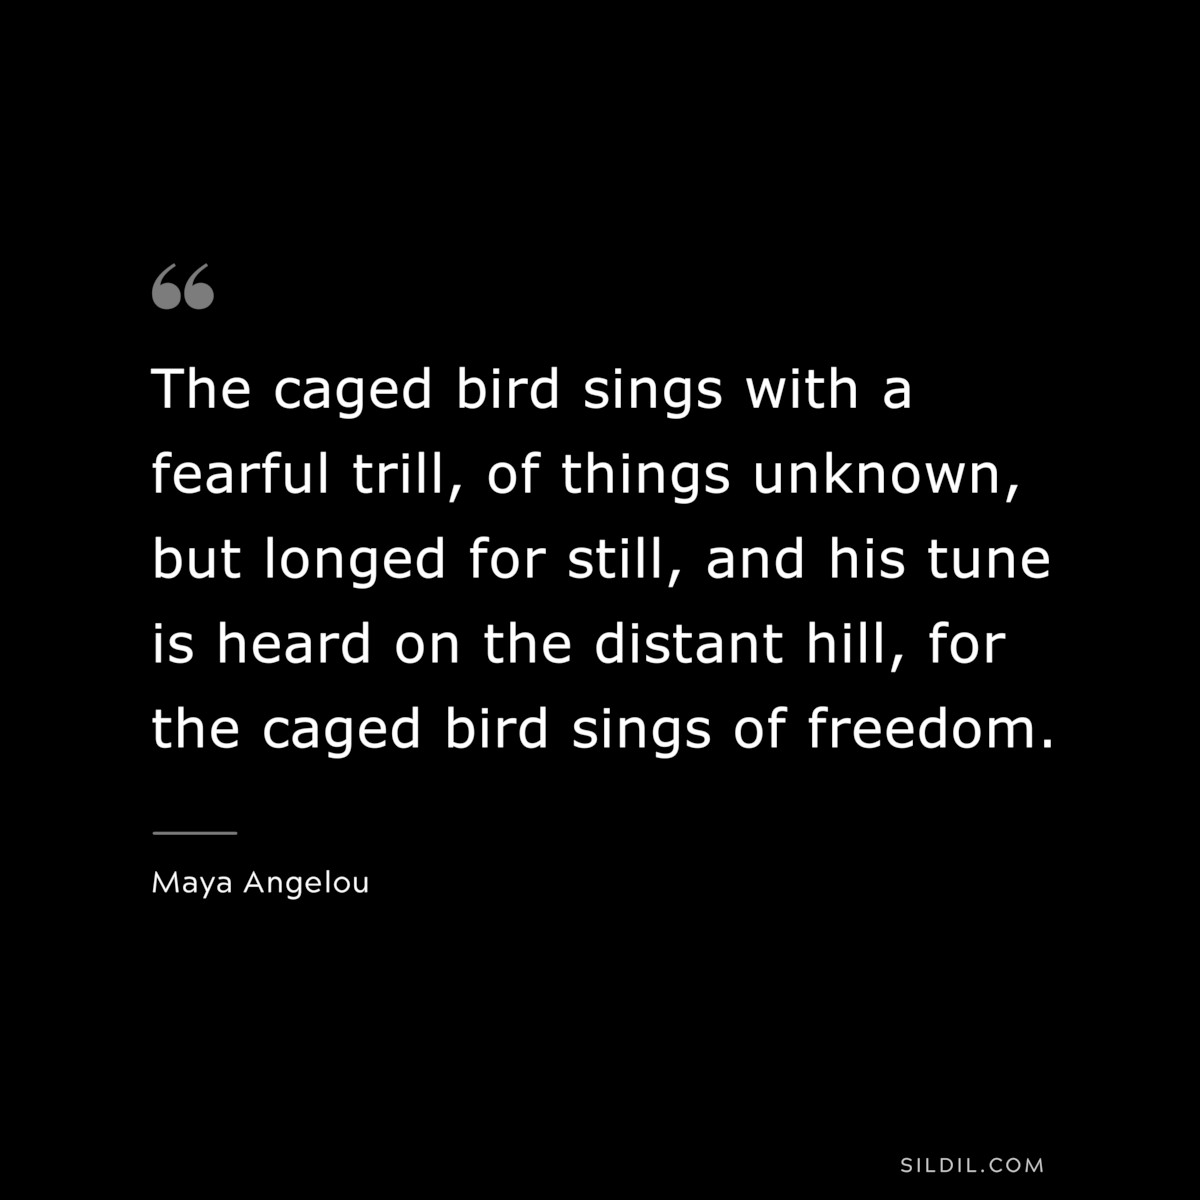 The caged bird sings with a fearful trill, of things unknown, but longed for still, and his tune is heard on the distant hill, for the caged bird sings of freedom. ― Maya Angelou